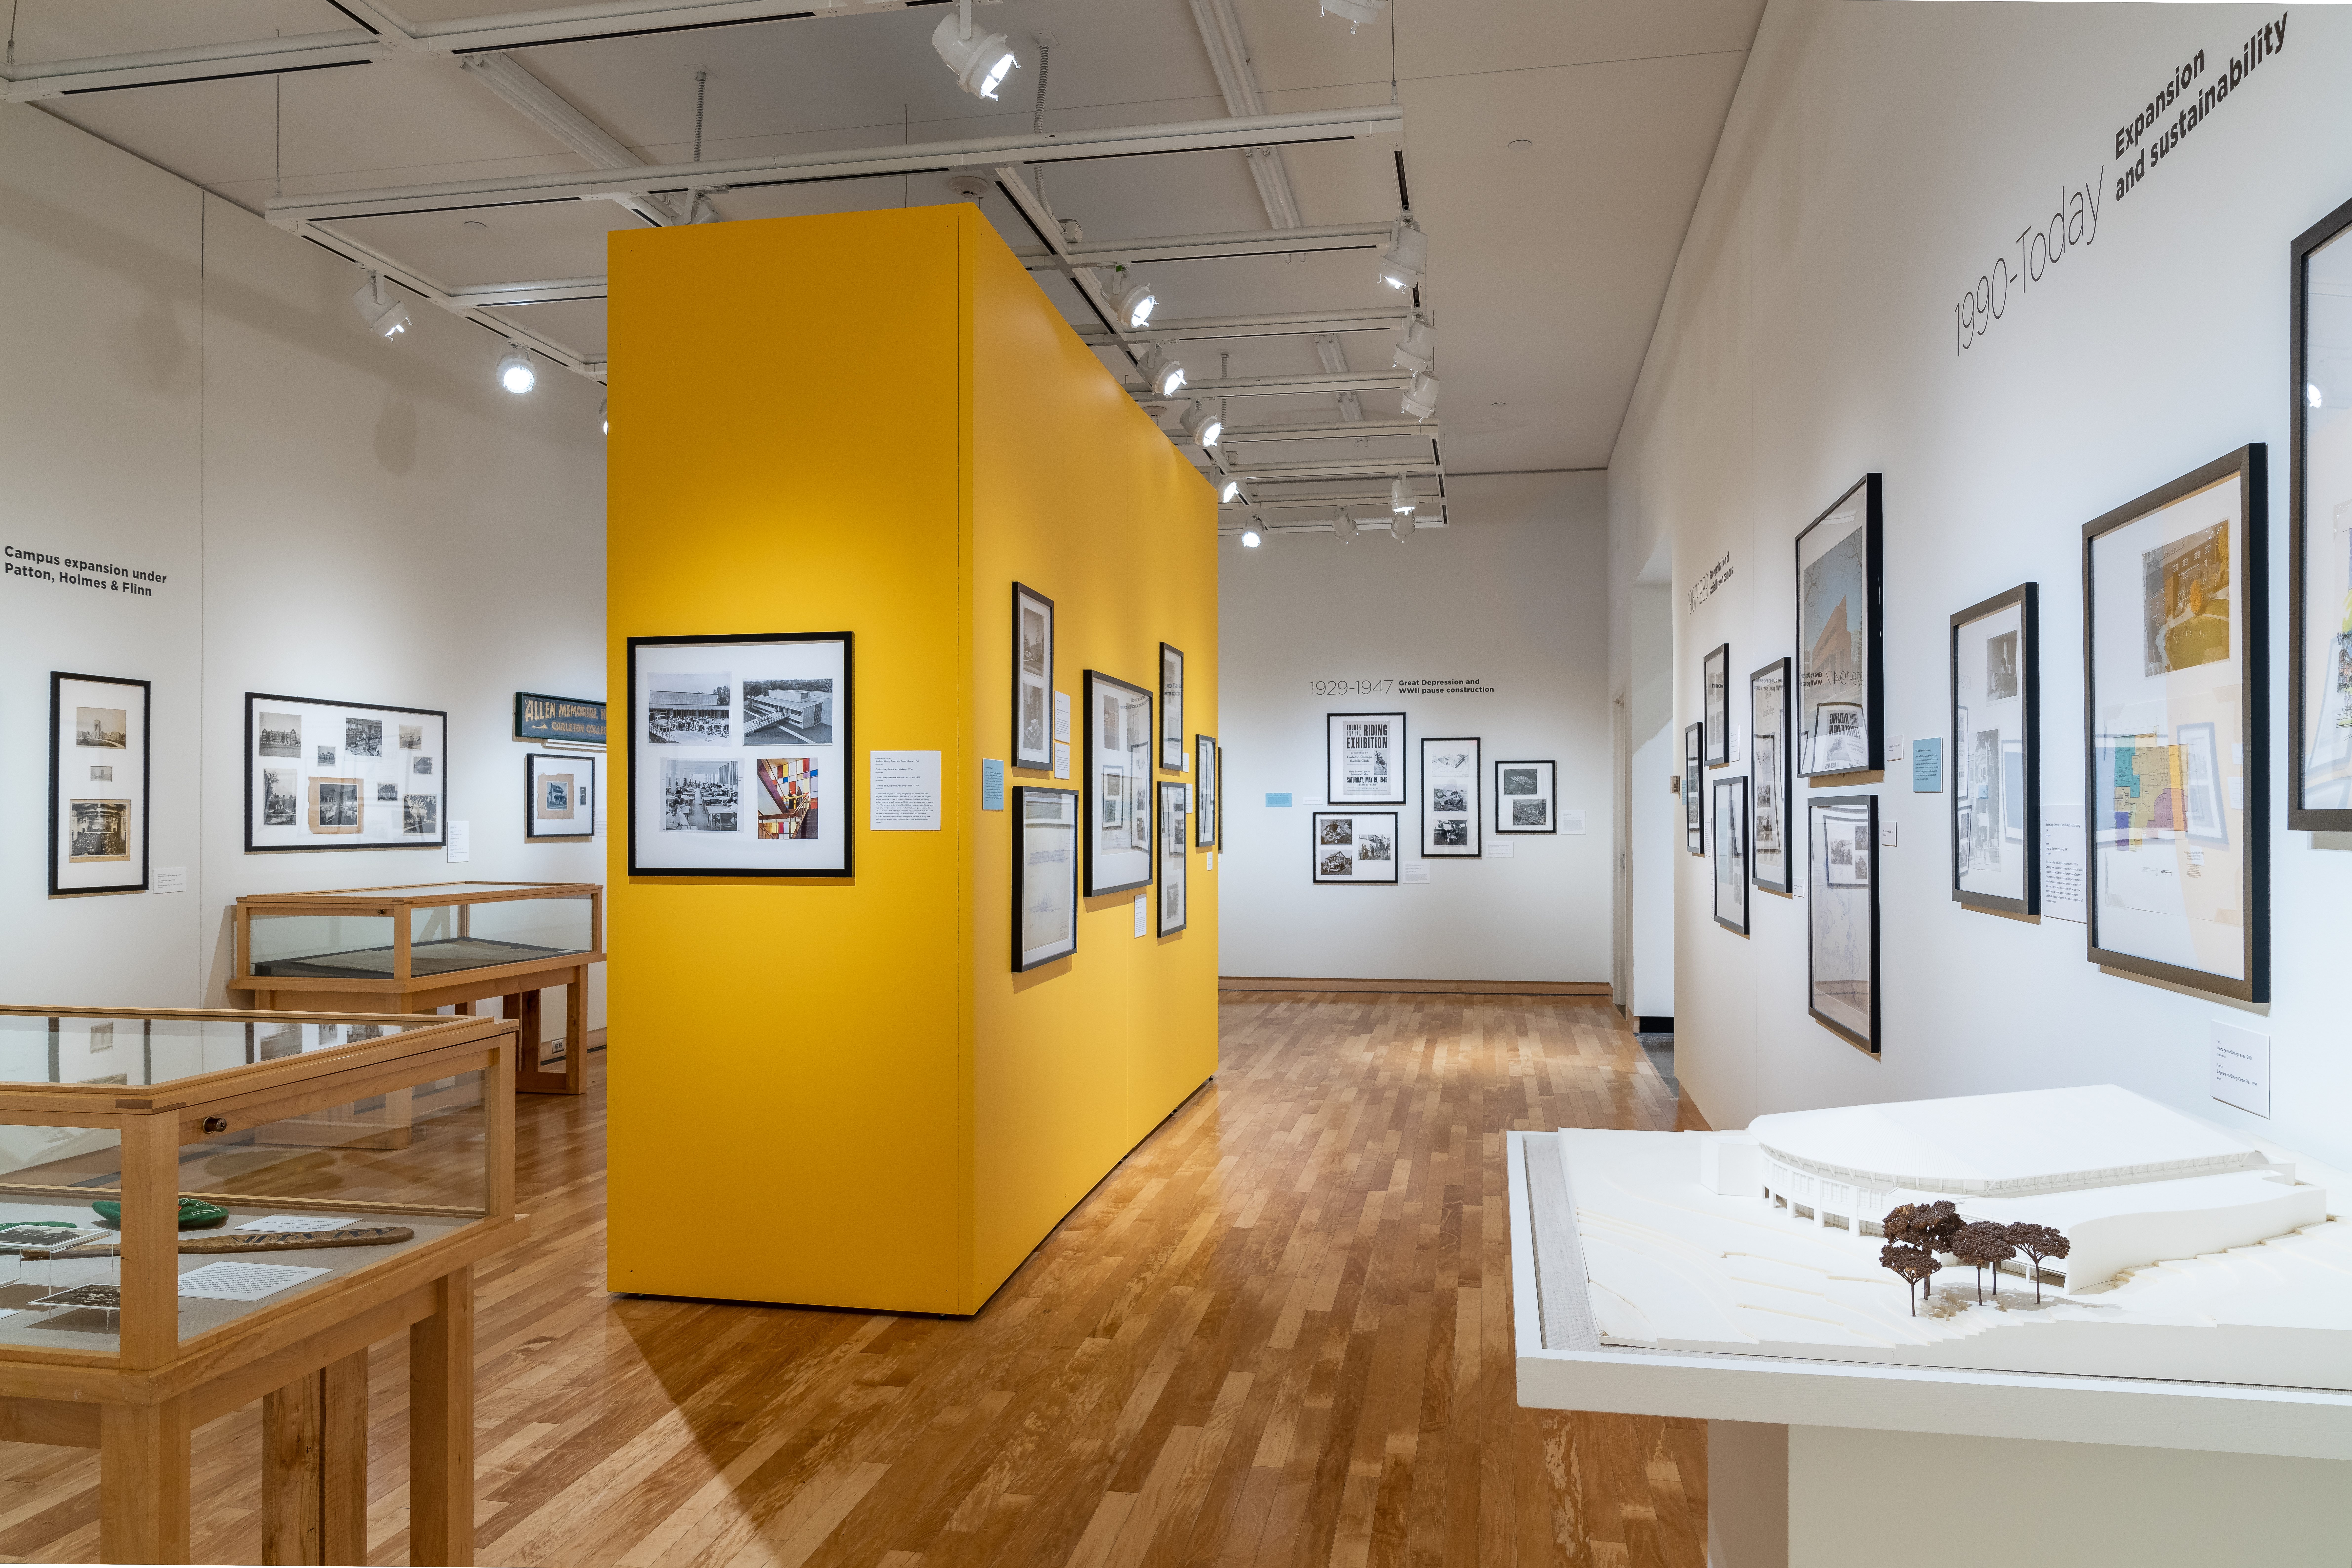 Photo of the yellow wall in the center of the gallery, with framed hanging images and glass display cases on two sides